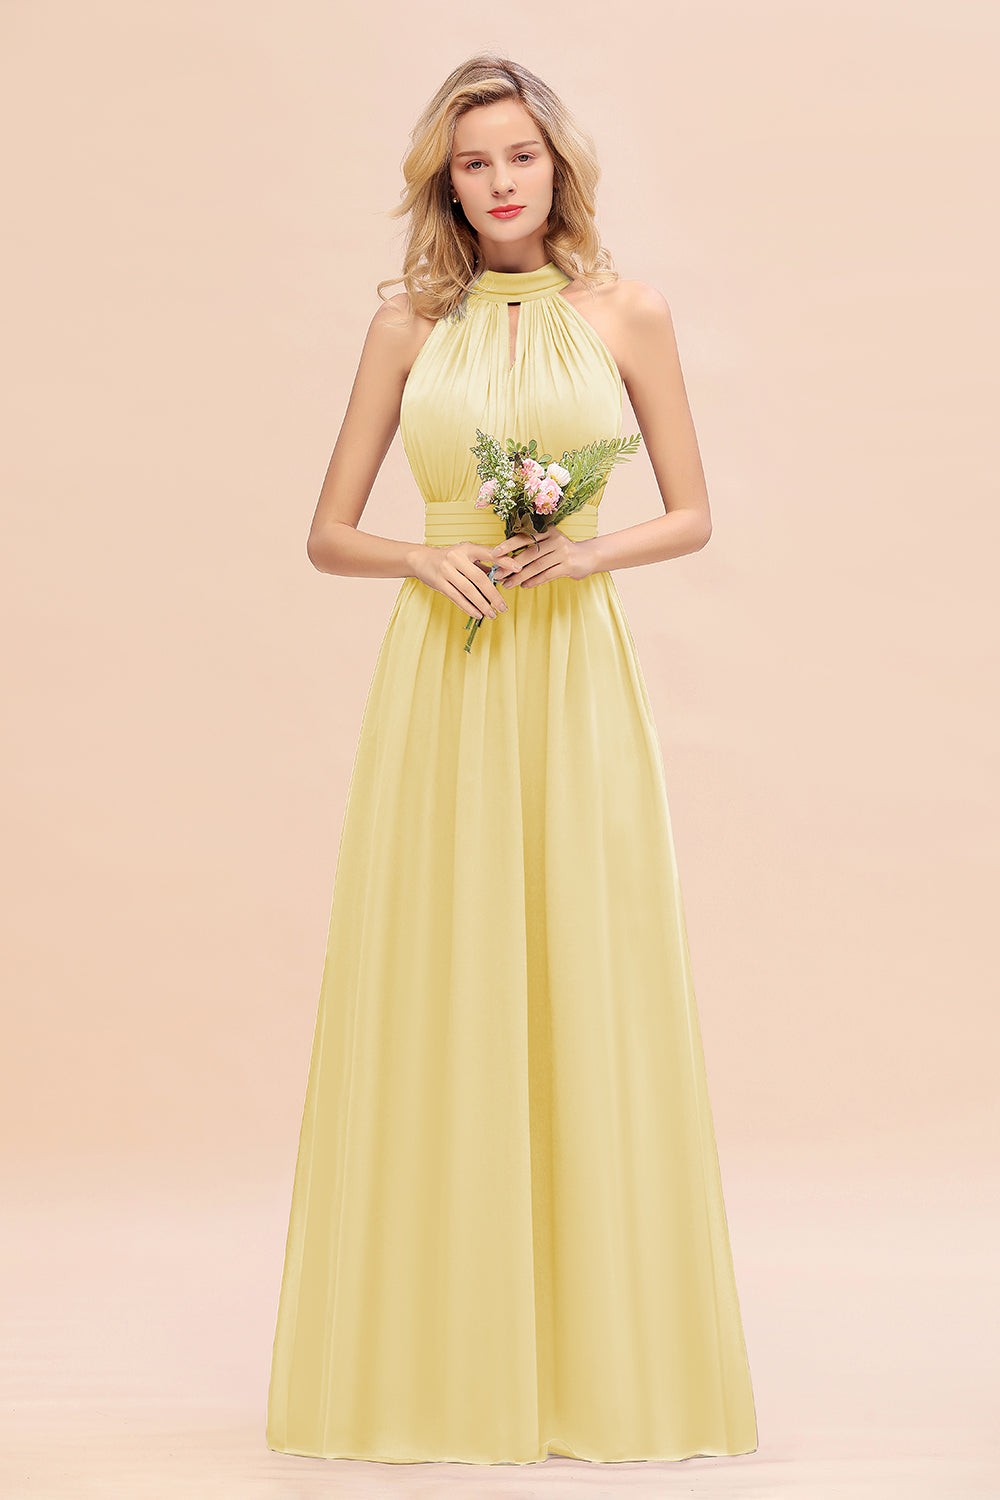 Glamorous High-Neck Halter Bridesmaid Affordable Dresses with Ruffle-27dress